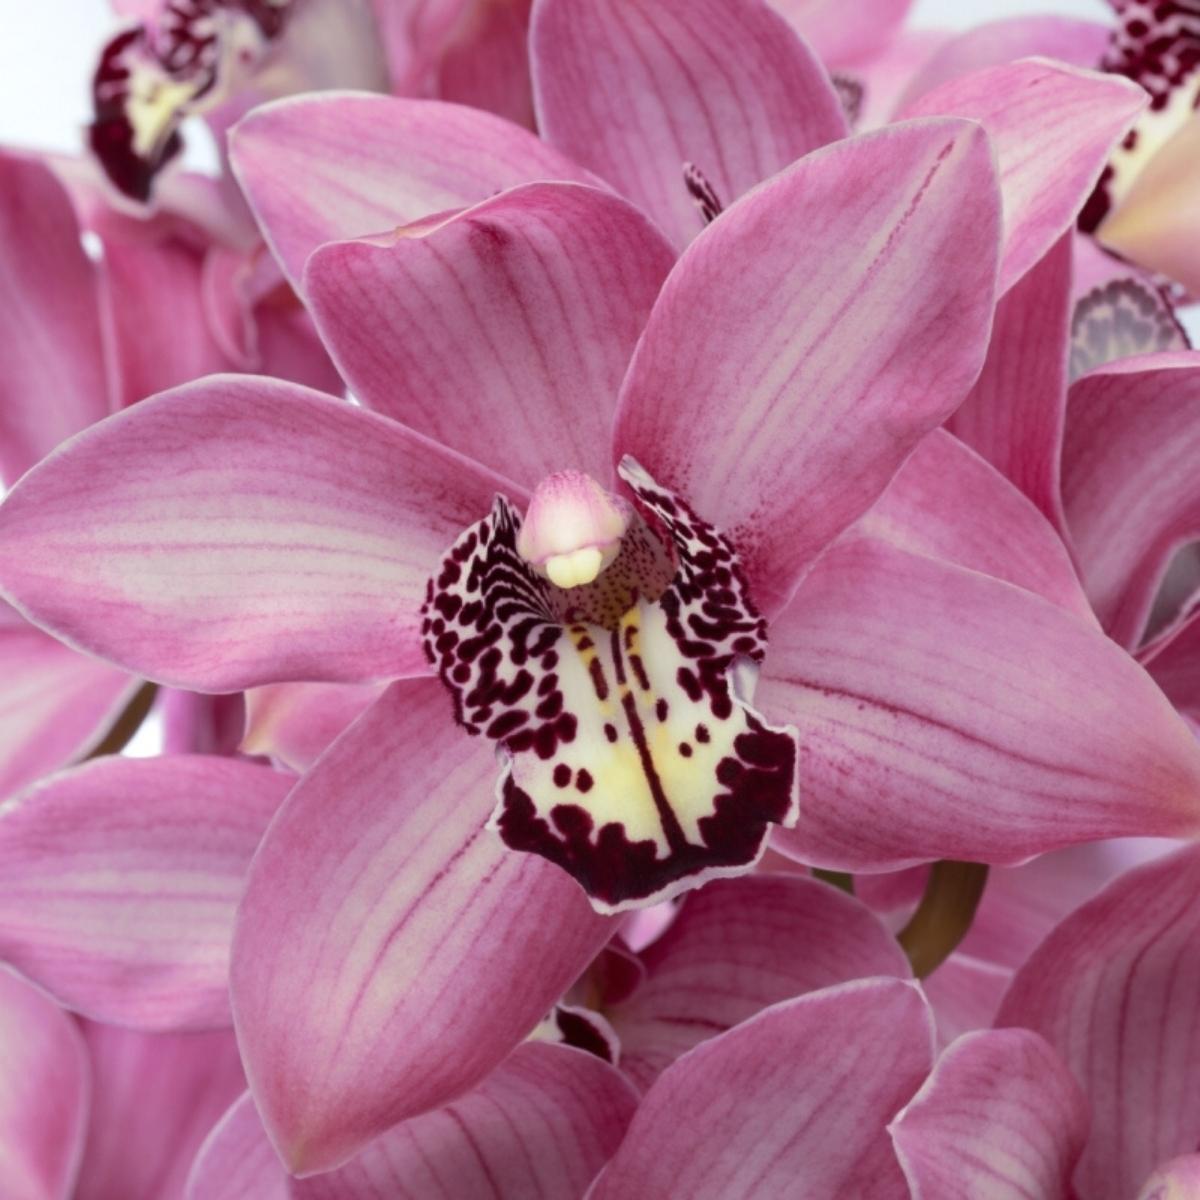 lose-yourself-in-the-beauty-of-cymbidium-kensi-featured